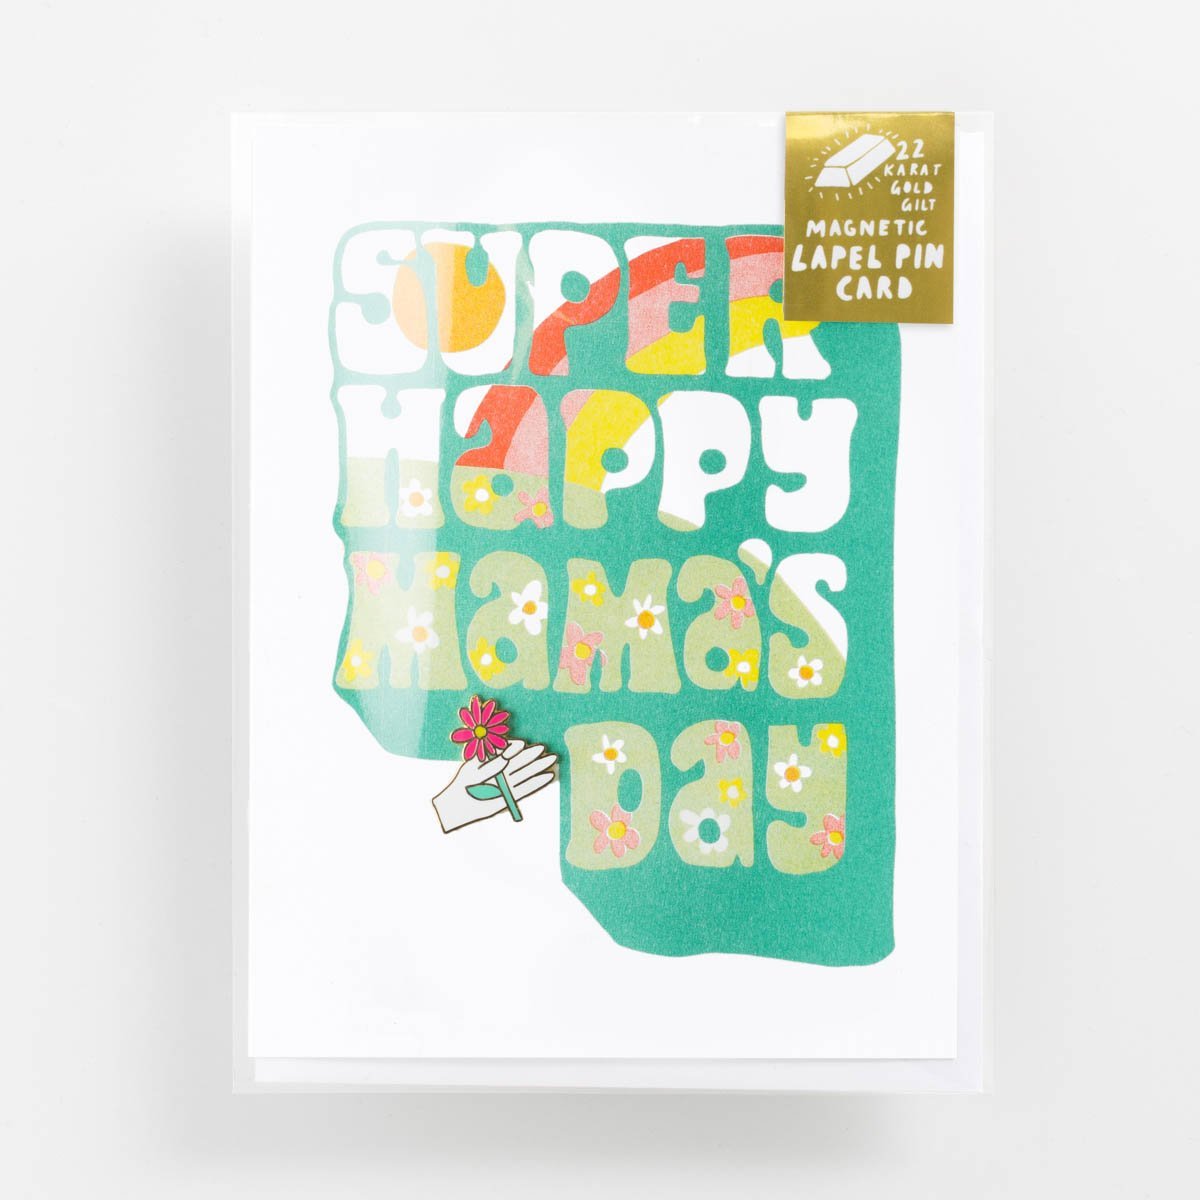 Super Happy Mama's Day - Lapel Pin Card - Yellow Owl Workshop